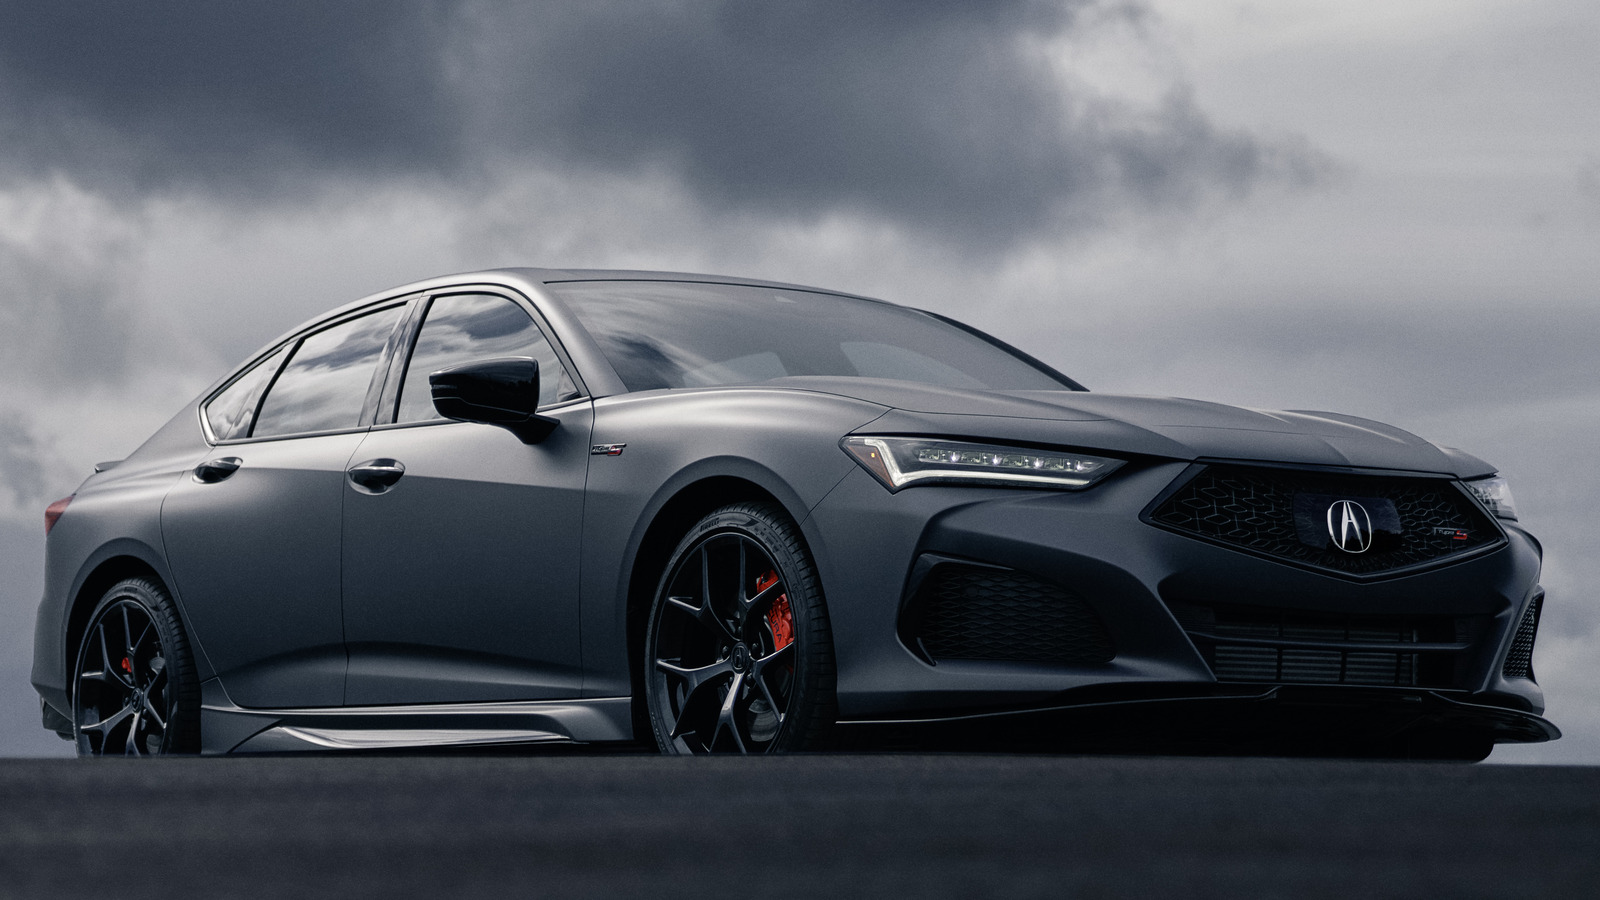 Acura Introduces Limited Edition BatmanInspired TLX Type S PMC Edition